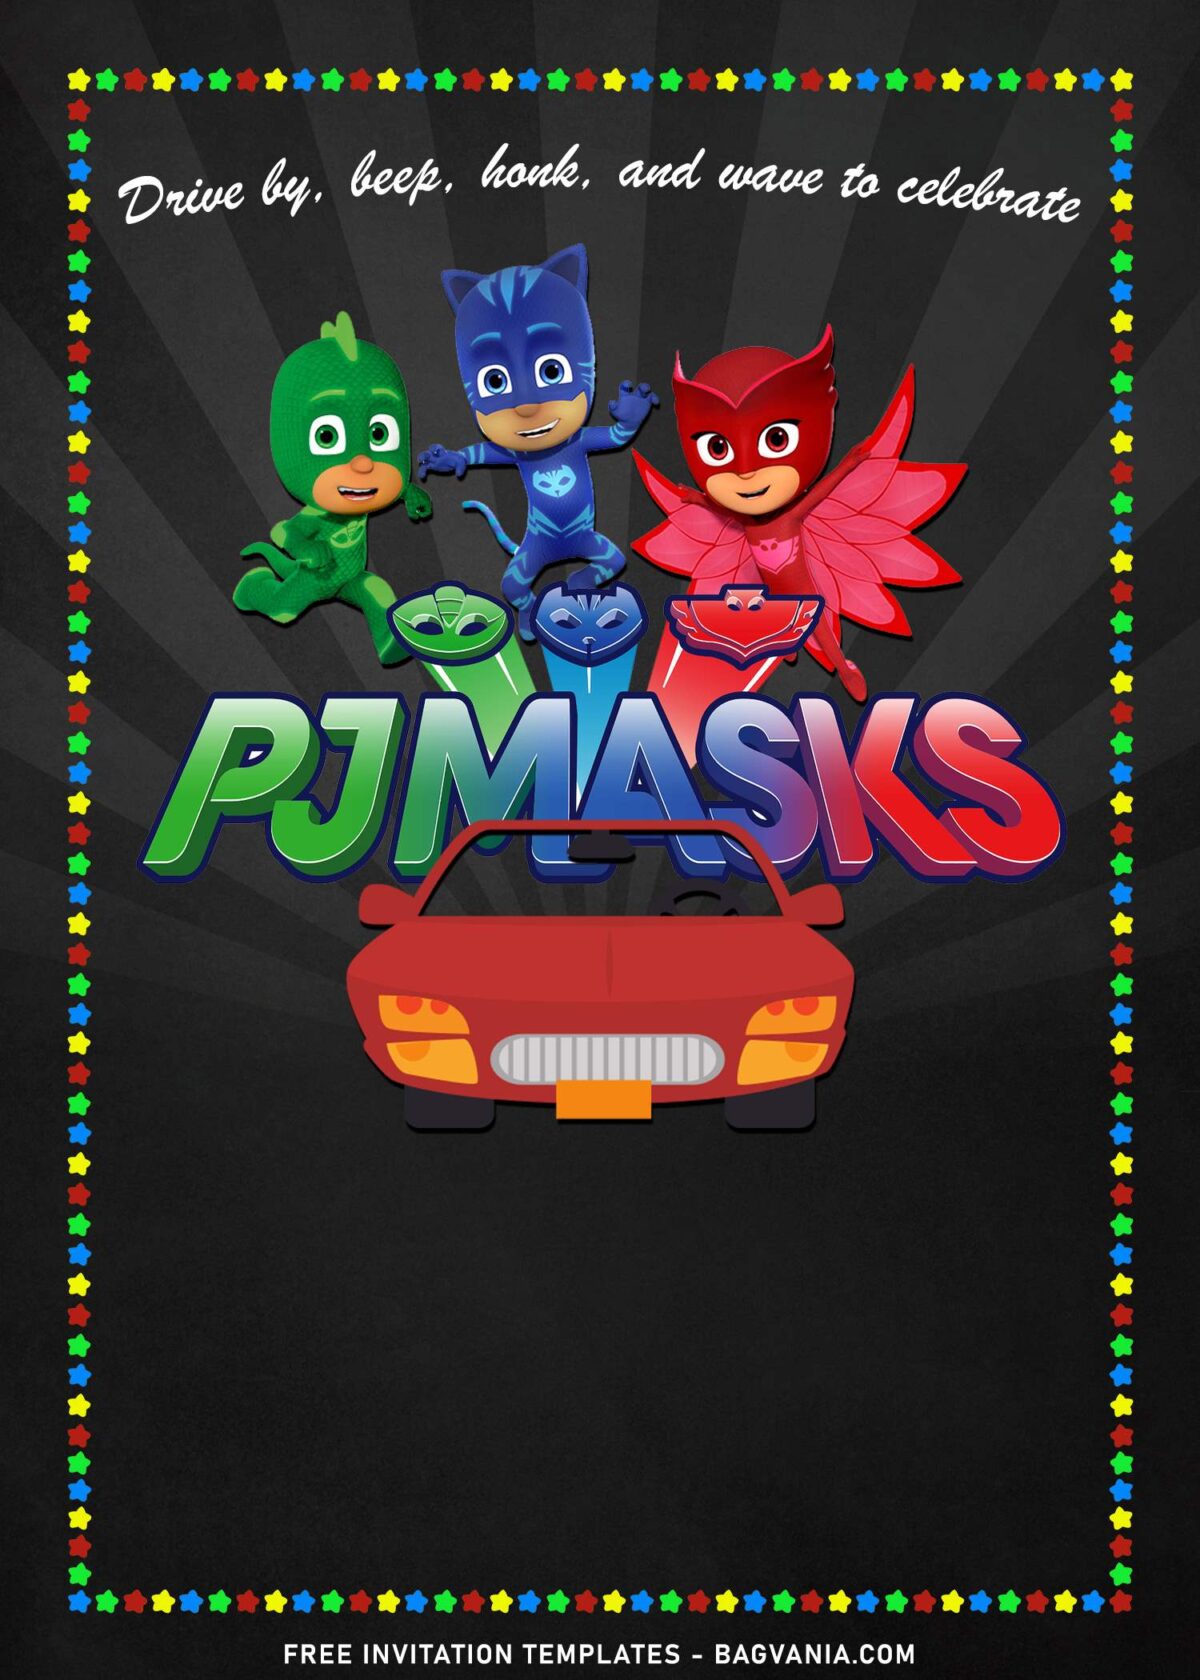 7+ Drive Honk And Wave PJ Masks Birthday Invitation Templates with Owlette